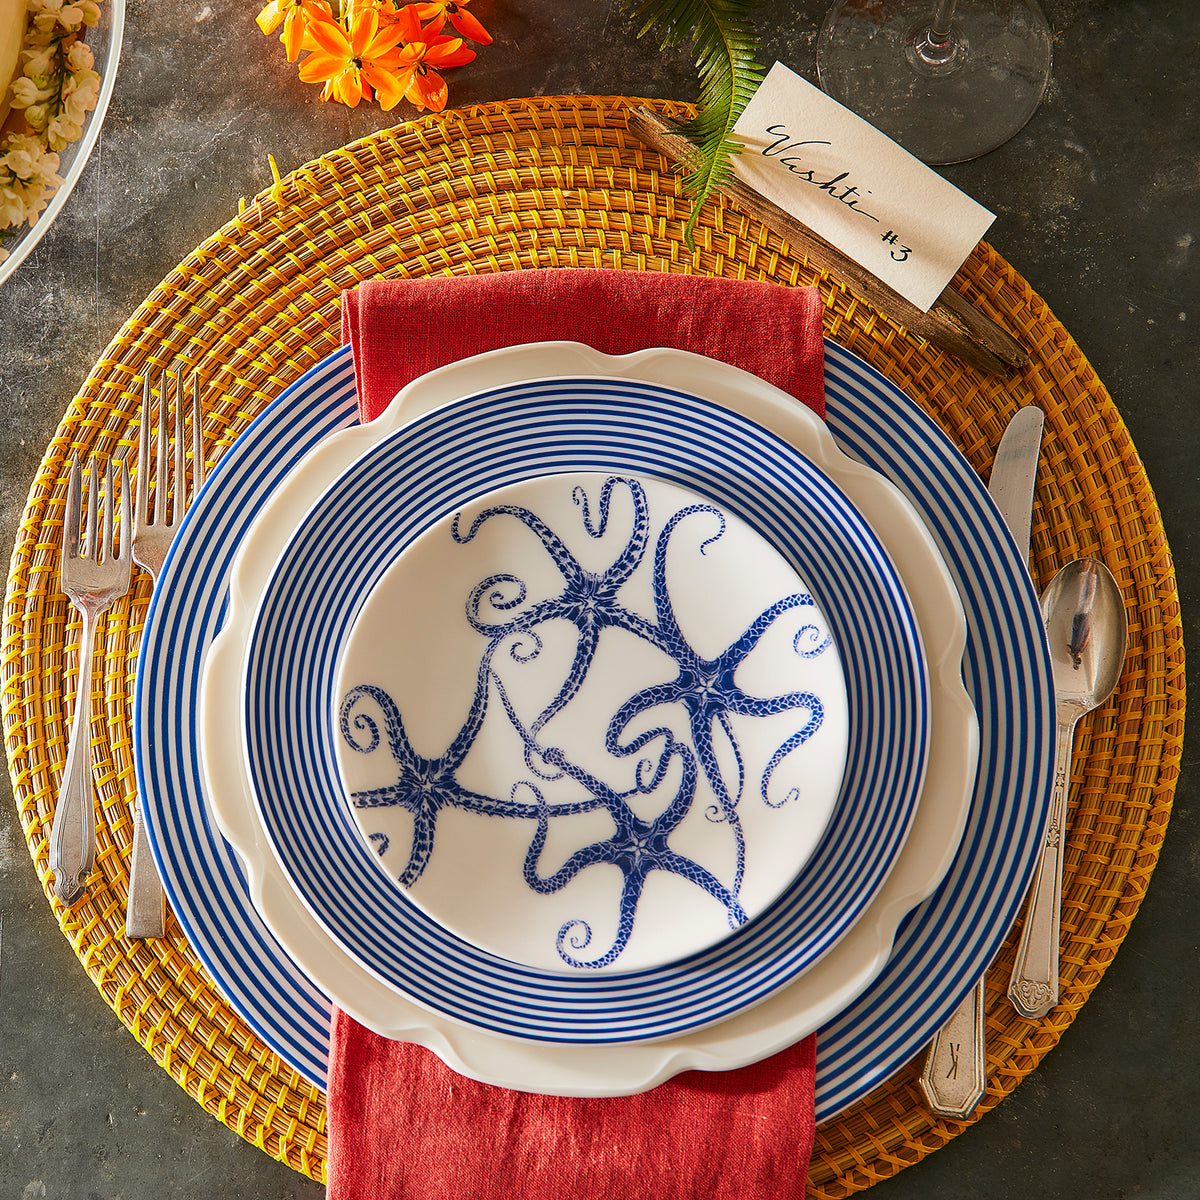 A high-fired porcelain dining plate adorned with blue starfish artwork rests on a Newport Stripe Rimmed Salad Plate by Caskata Artisanal Home, complemented by a red napkin, a fork, knife, spoon, and a place card labeled &quot;Yashlin&quot; on a woven placemat.